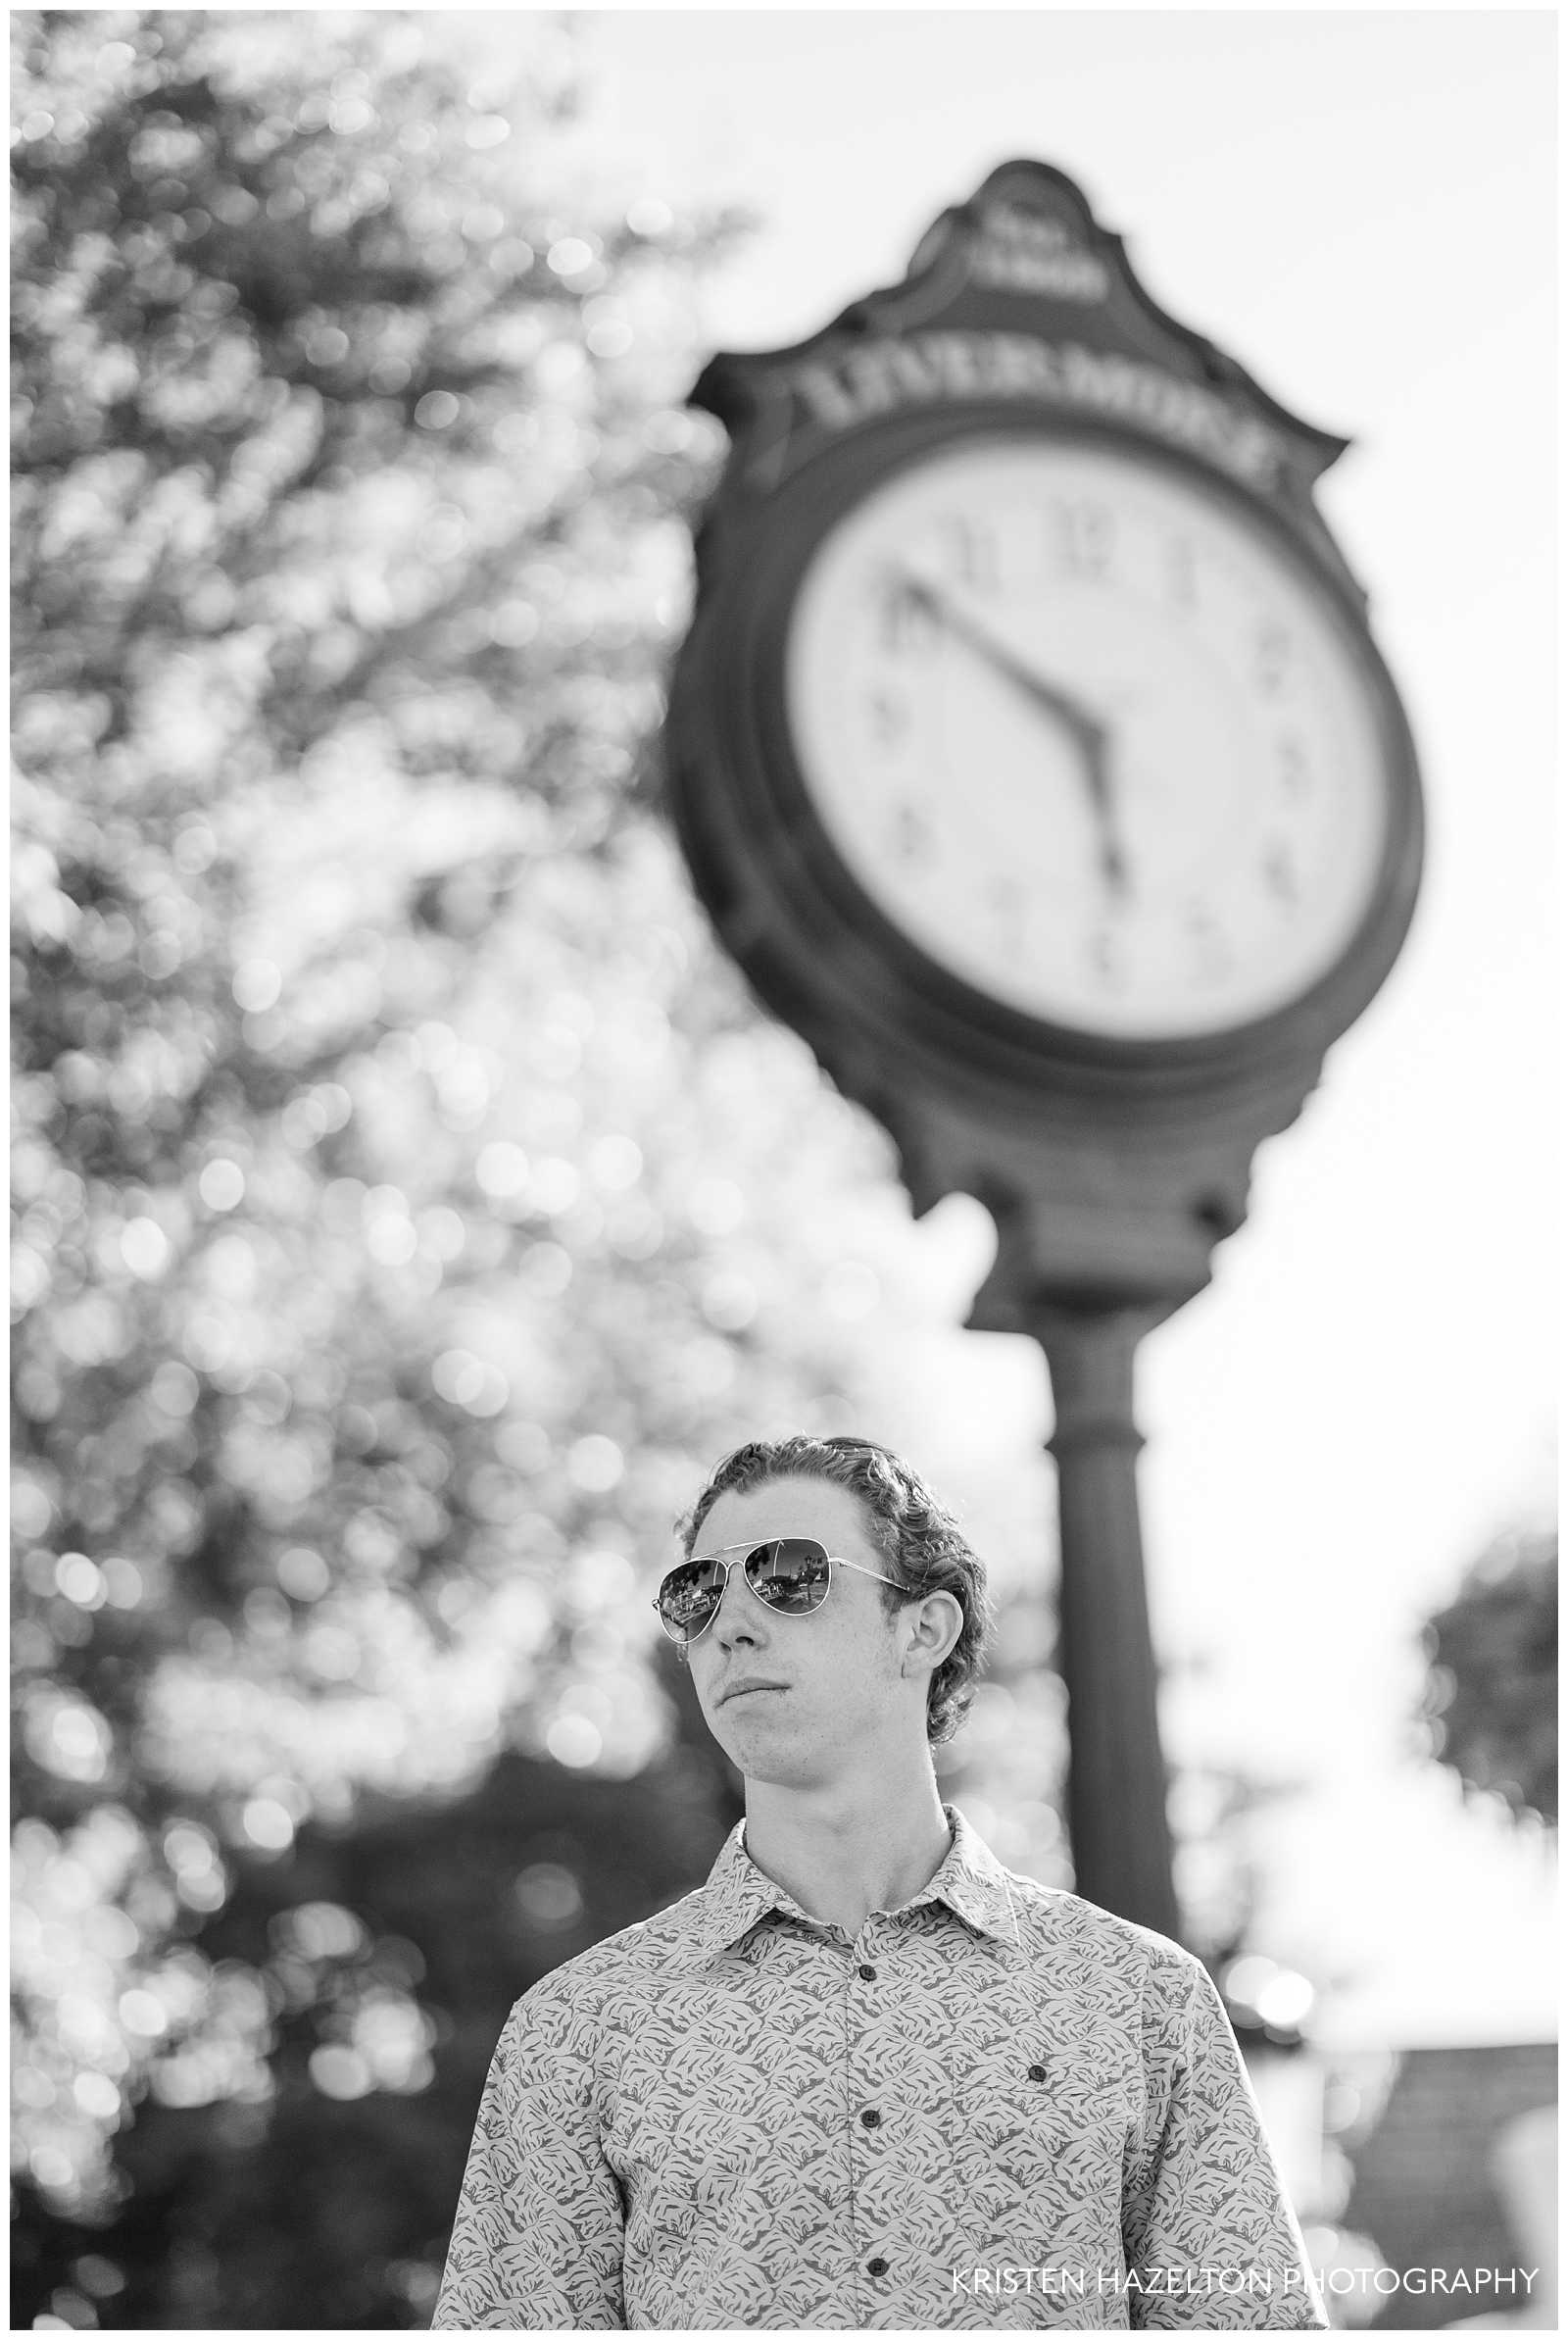 Male high school senior portraits in downtown with a clock in the background